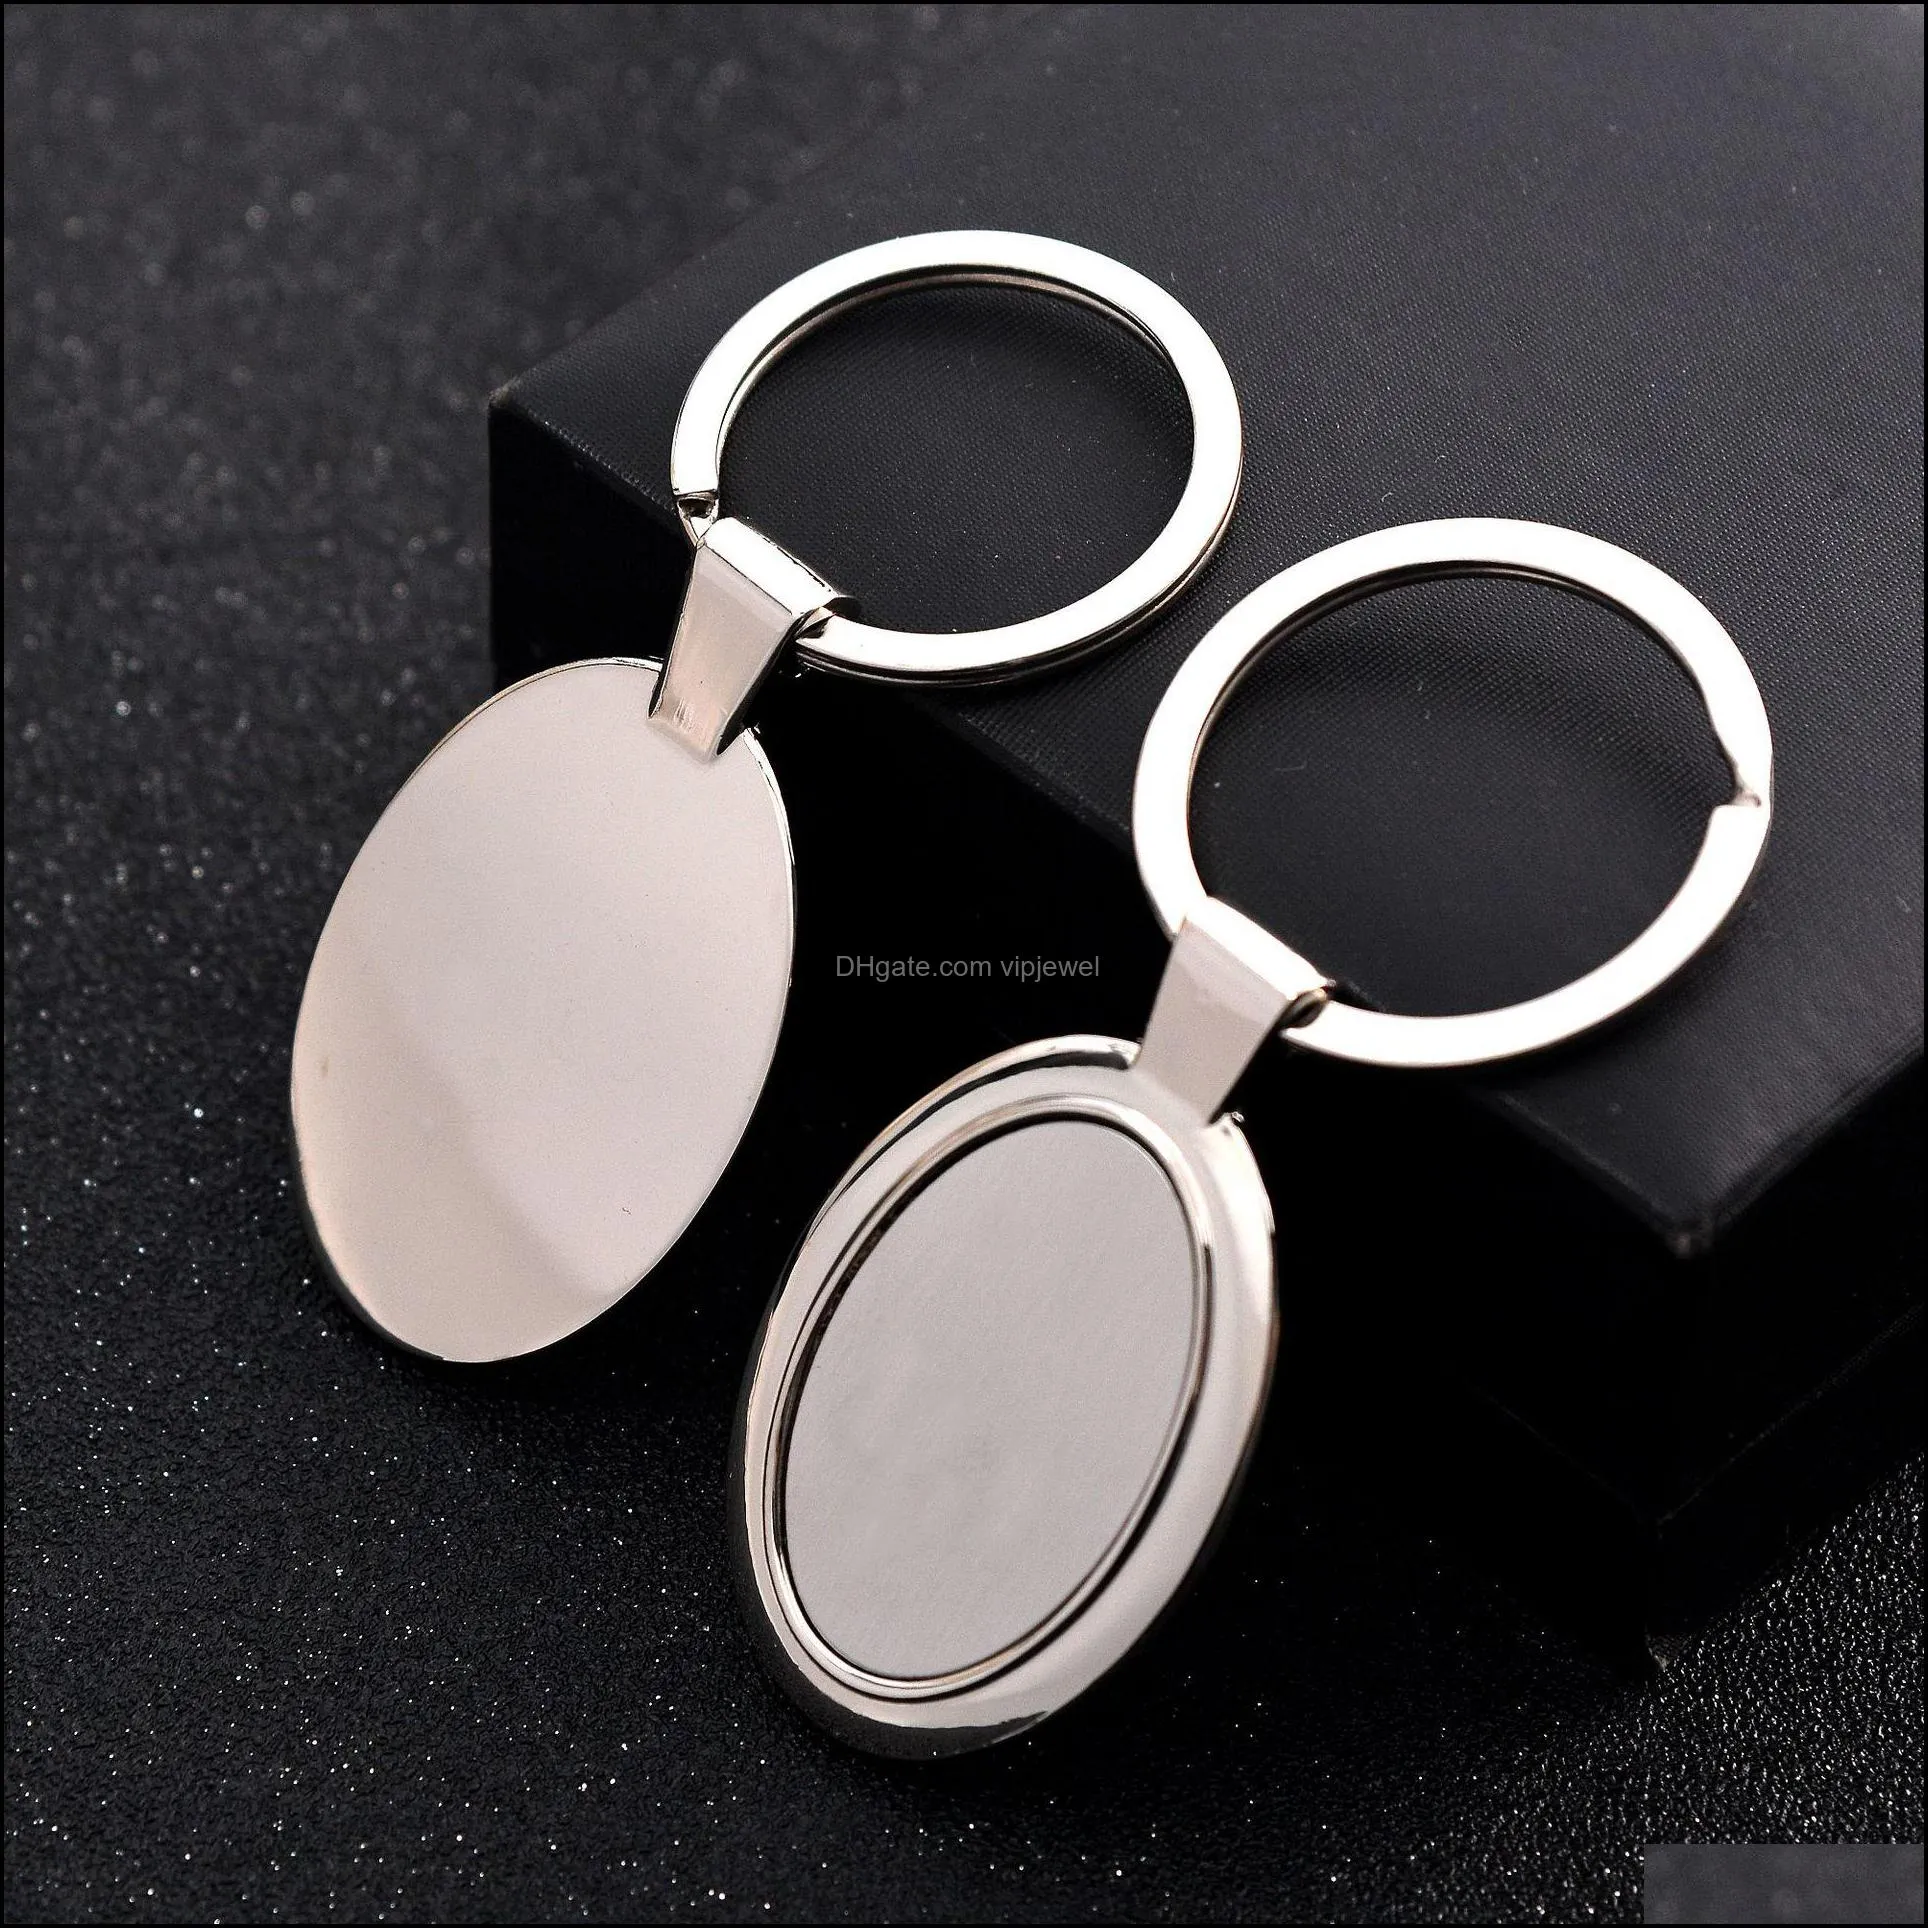 stainless steel metal blank keychain fashion geometry shape pendant keyring holder for men car key chains a142z